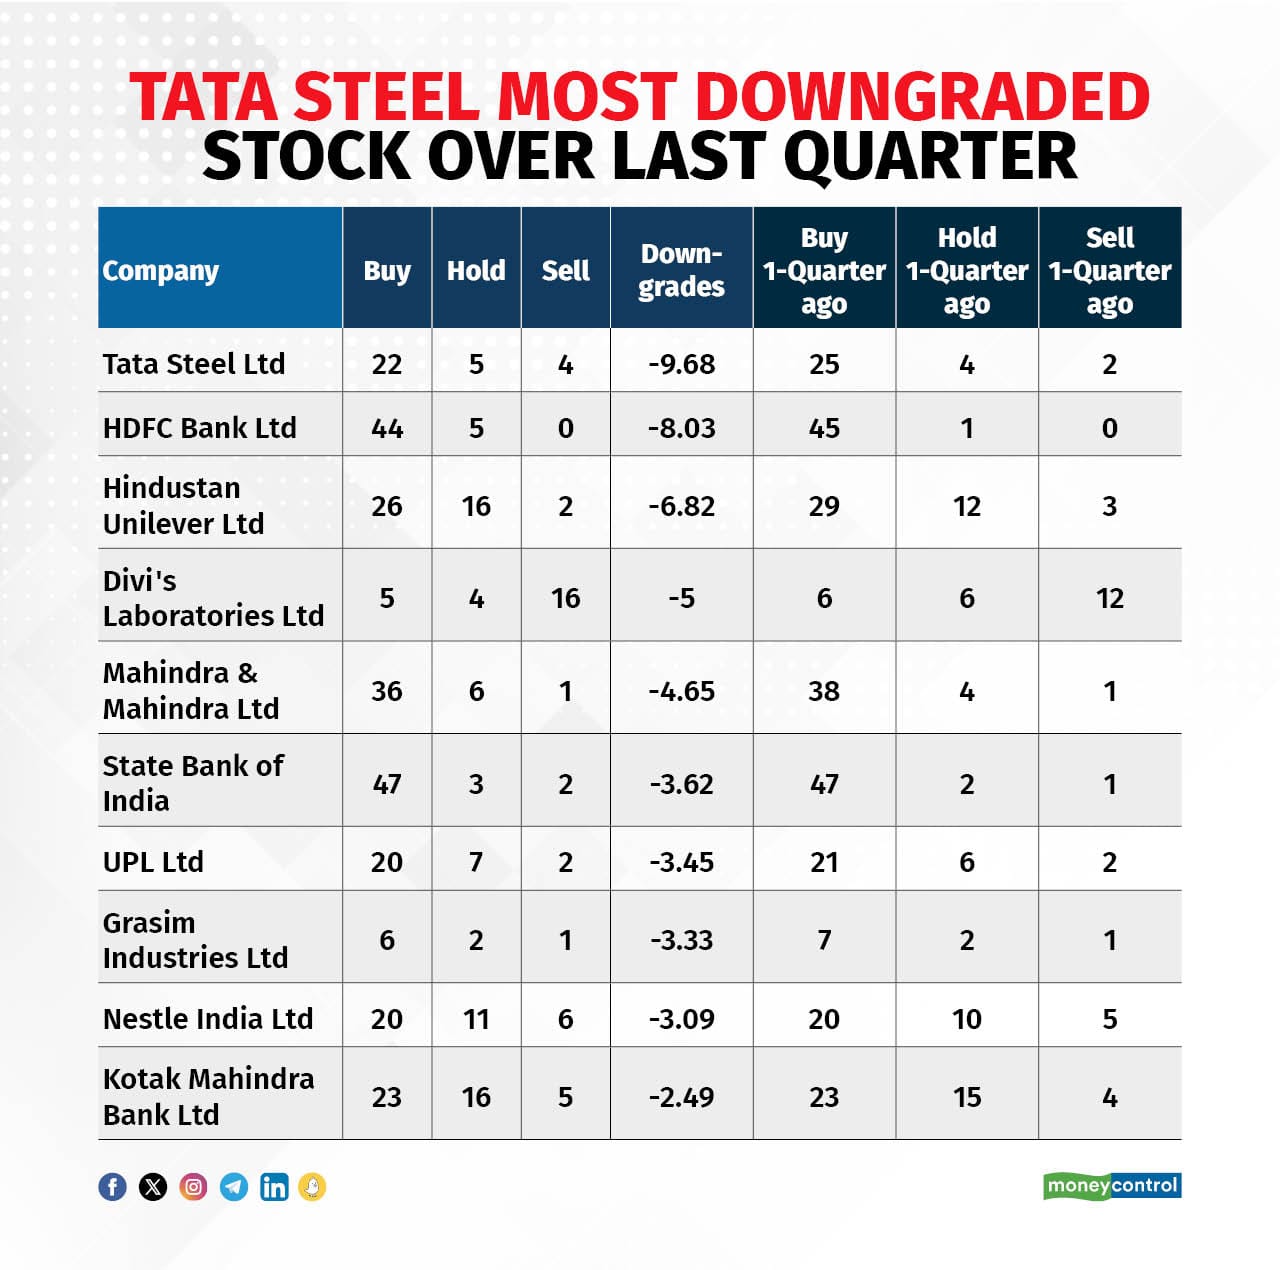 Tata Steel Expects Better Performance In Second Half Of FY24, Says CEO